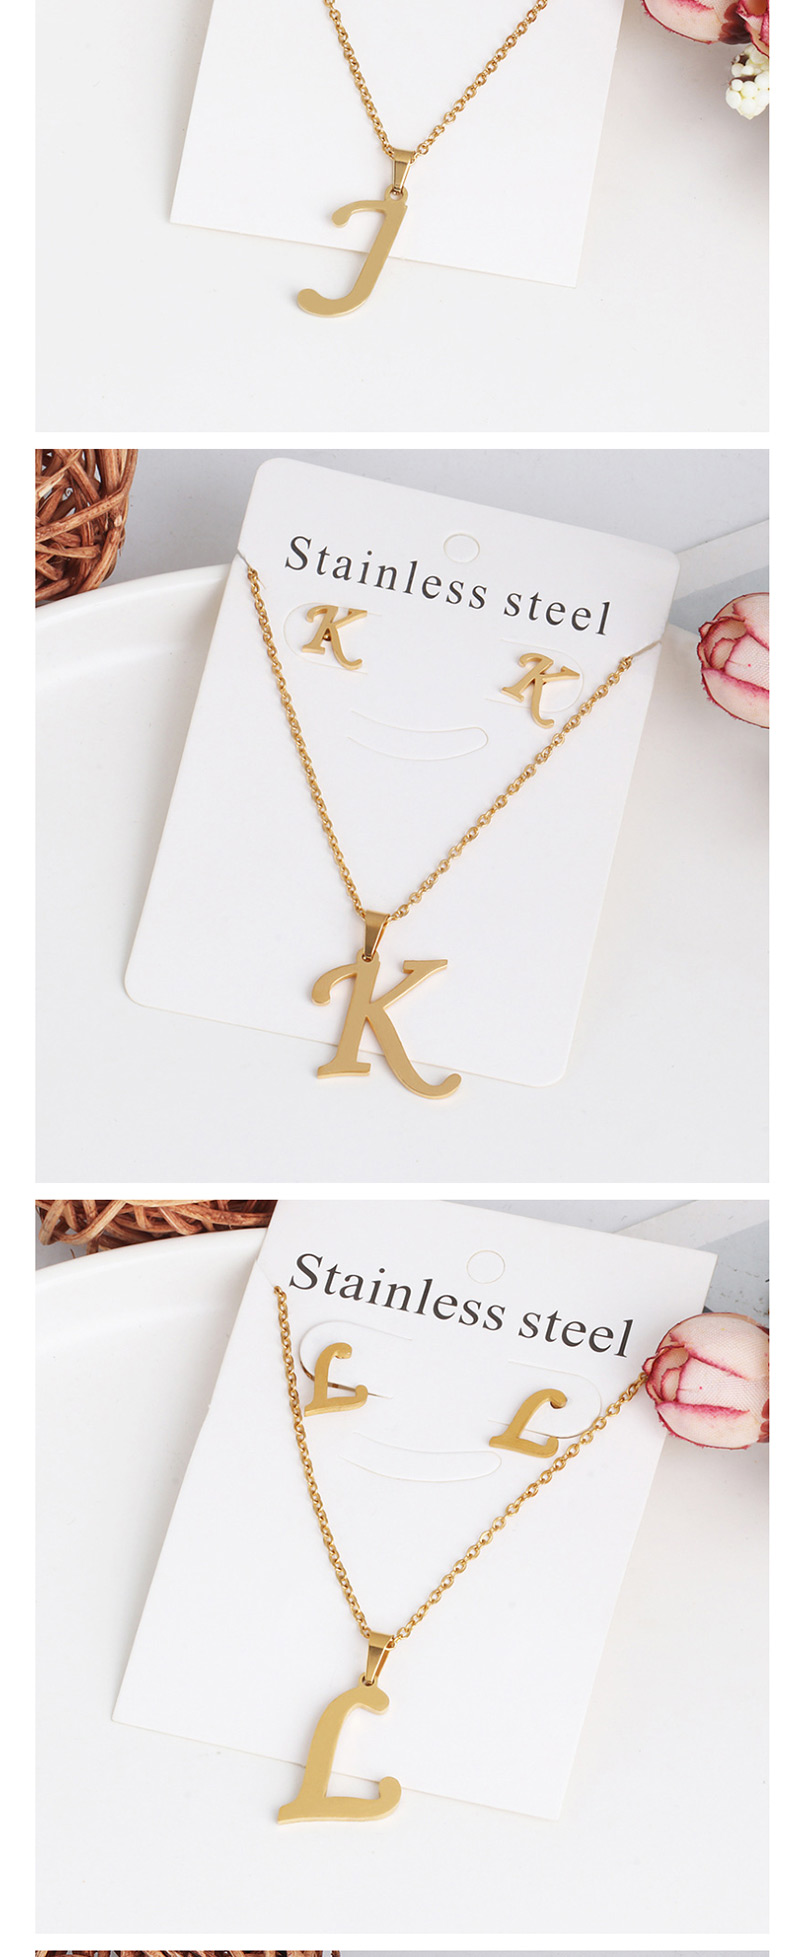 Fashion B Gold Stainless Steel Letter Necklace Earrings Two-piece,Jewelry Sets